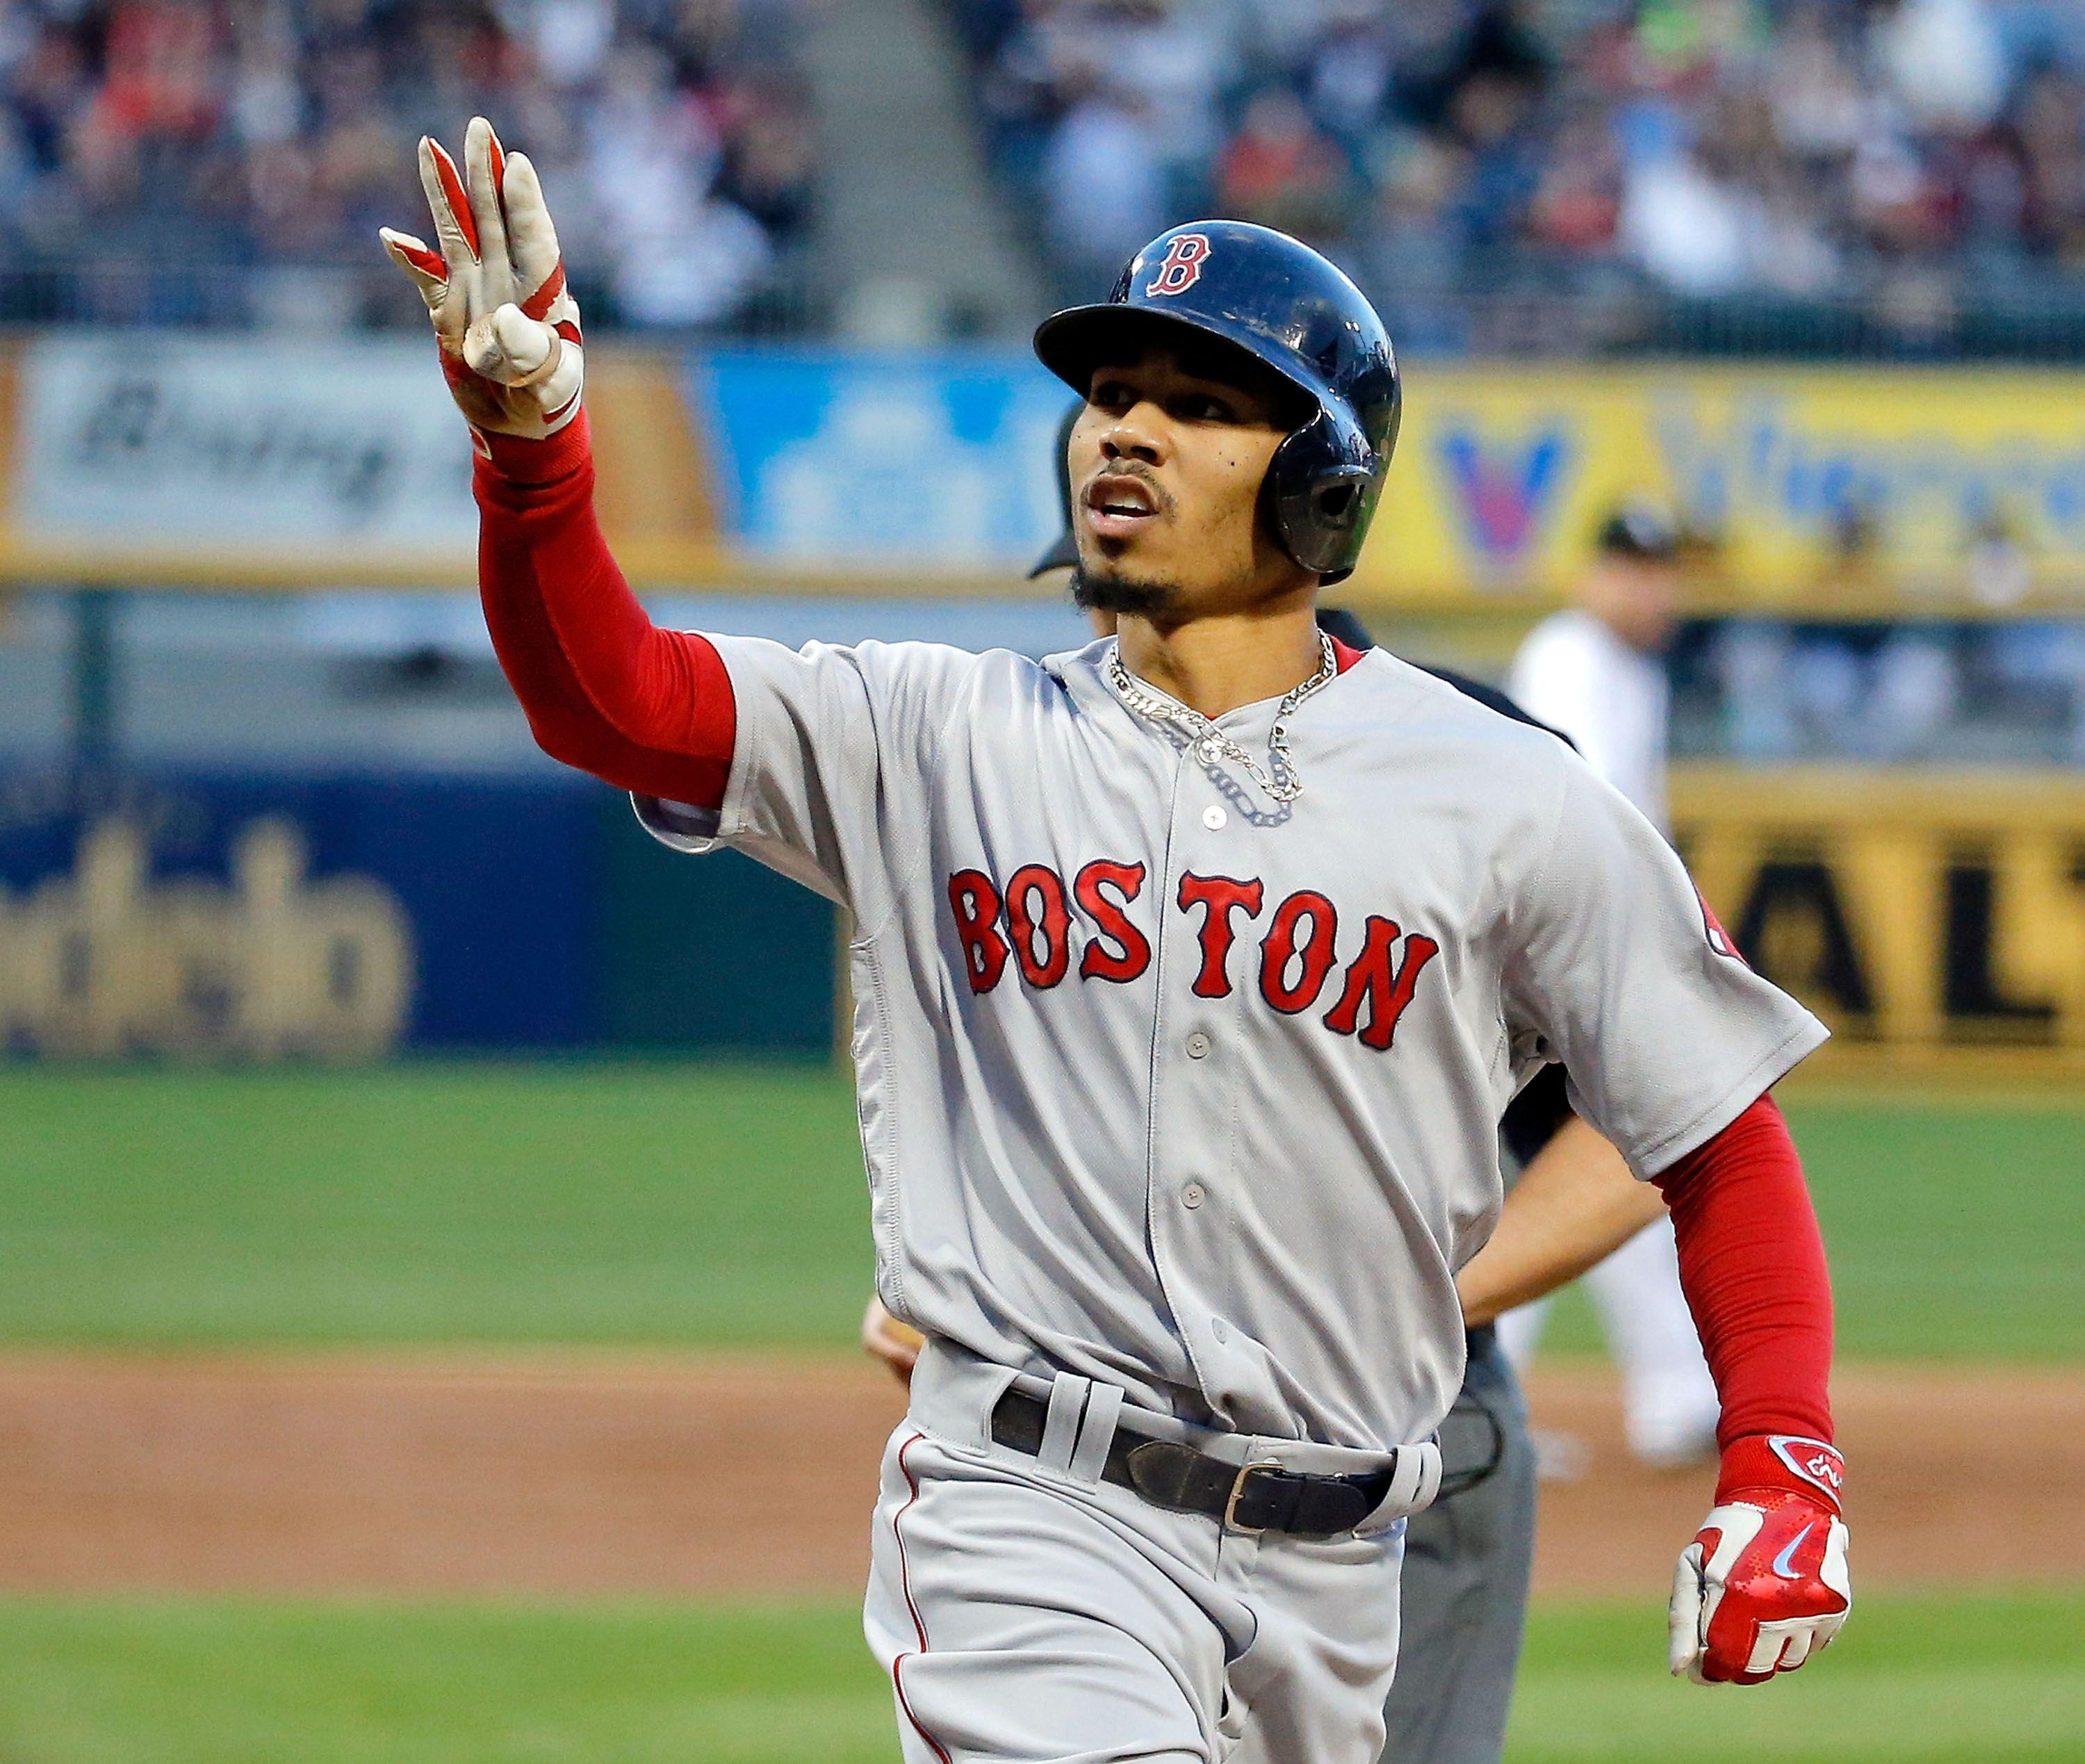 Mookie Betts is about to get hot the Monster